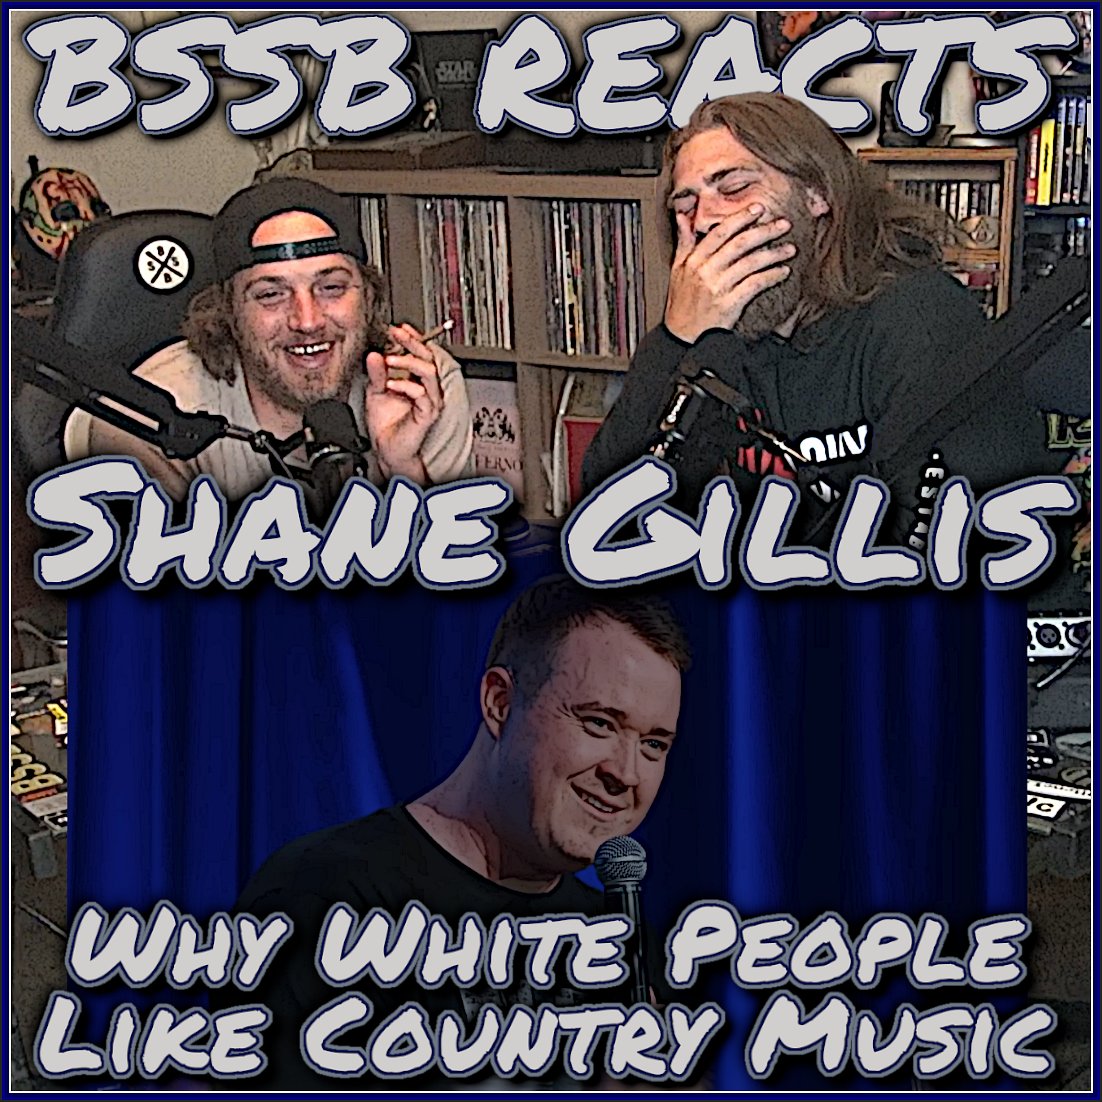 Eric and Mark watch the Shane Gillis stand-up bit Why White People Like Country Music and react. https://t.co/u9rijbPosd #ShaneGillis #WhyWhitePeopleLikeCountryMusic #StandUp #BSSBpodcast #BluntSmokersSmokeBlunts #BSSBreacts https://t.co/U2IxwDS7cW